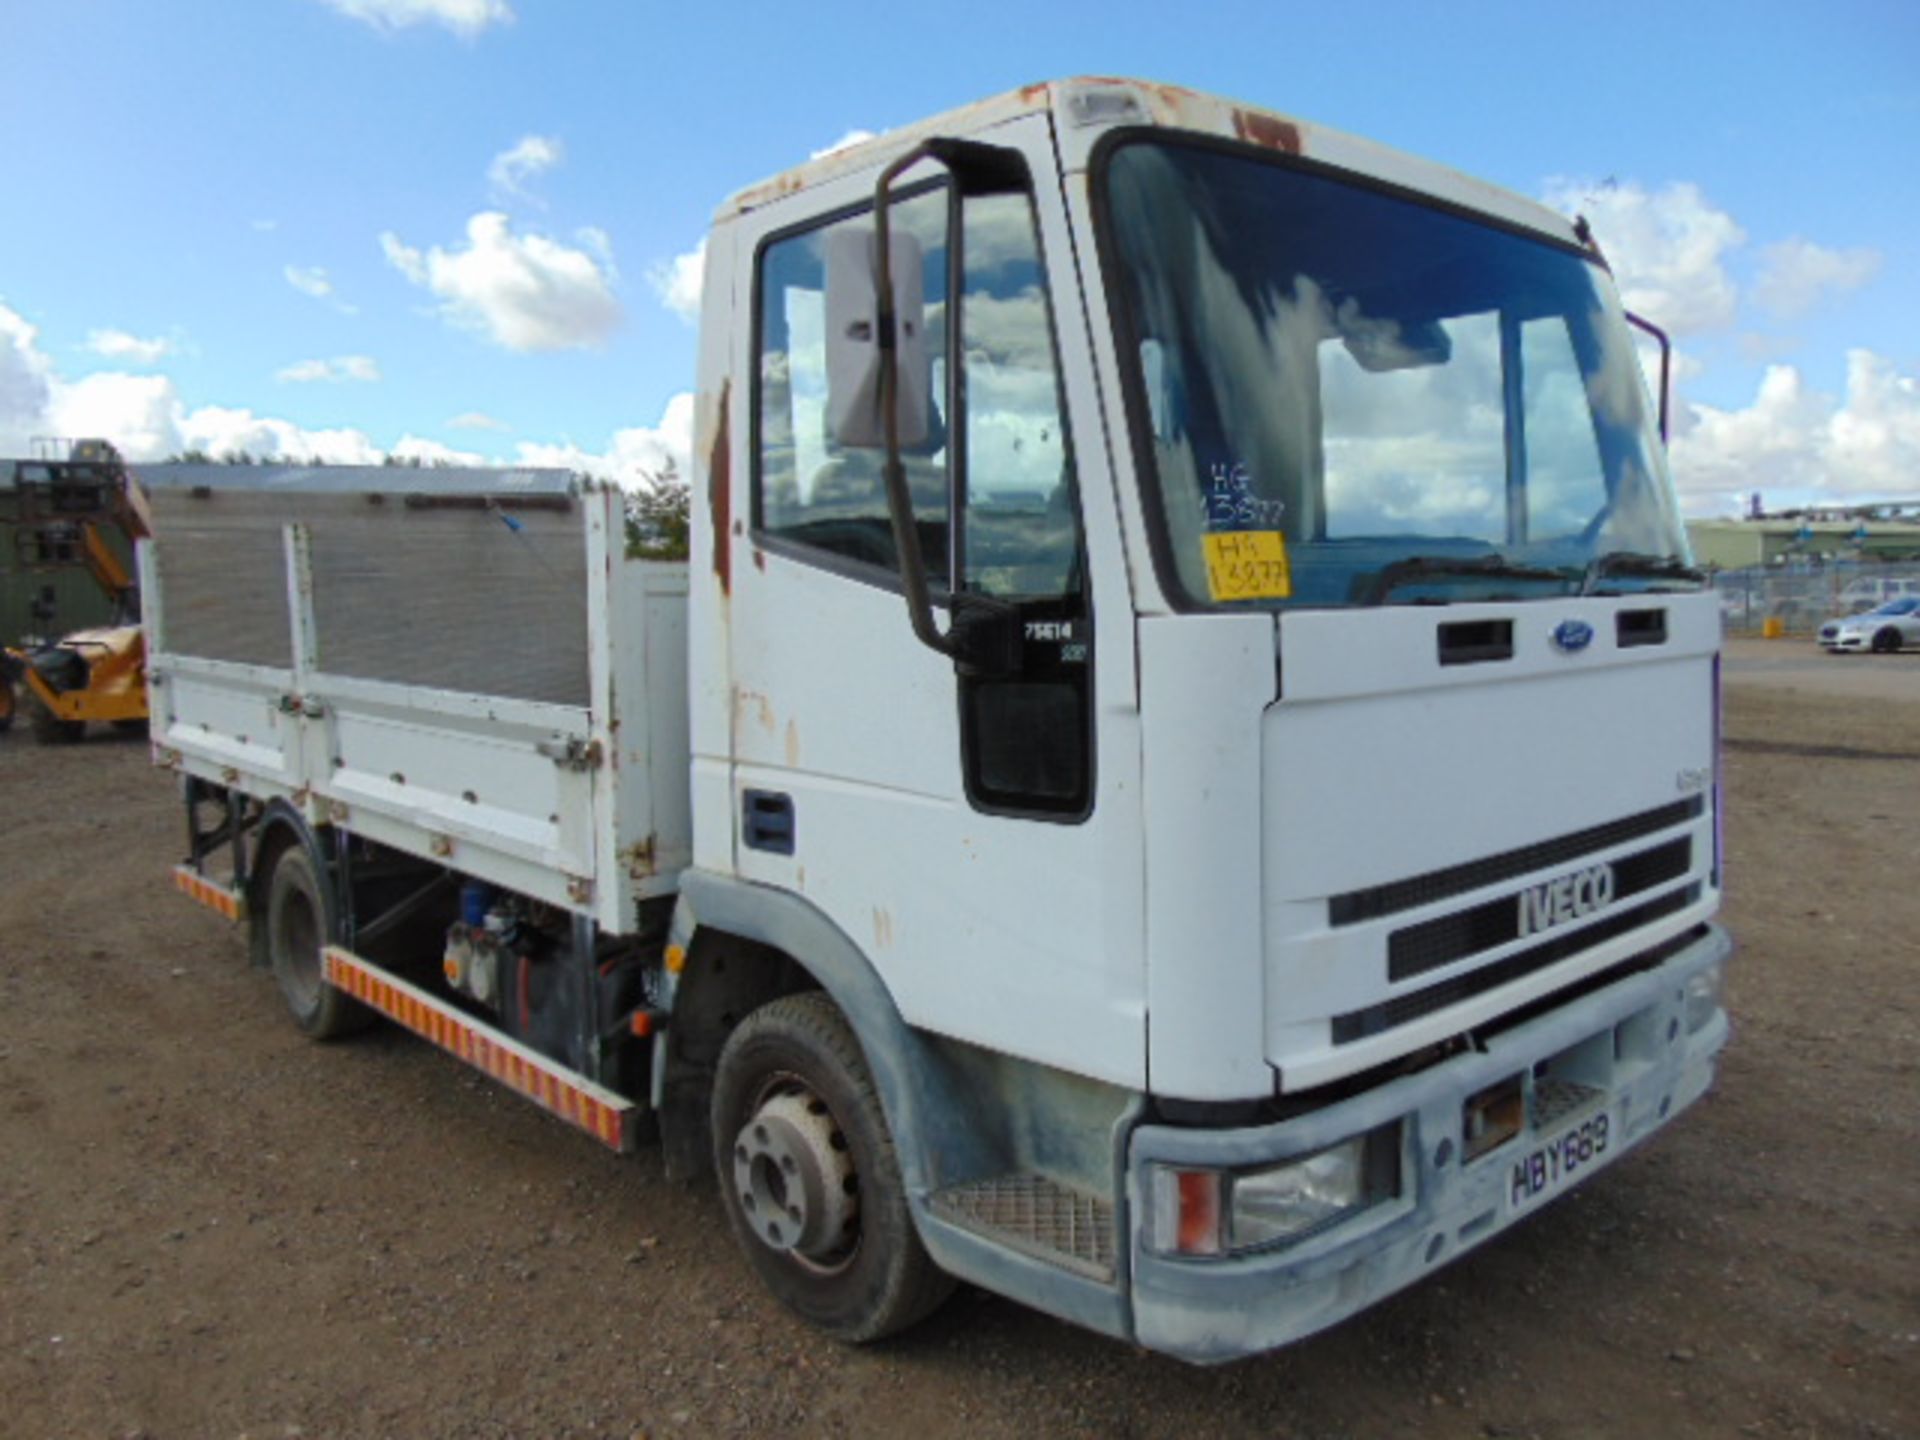 Ford Iveco Cargo 75E14 Complete with Rear Tail Lift